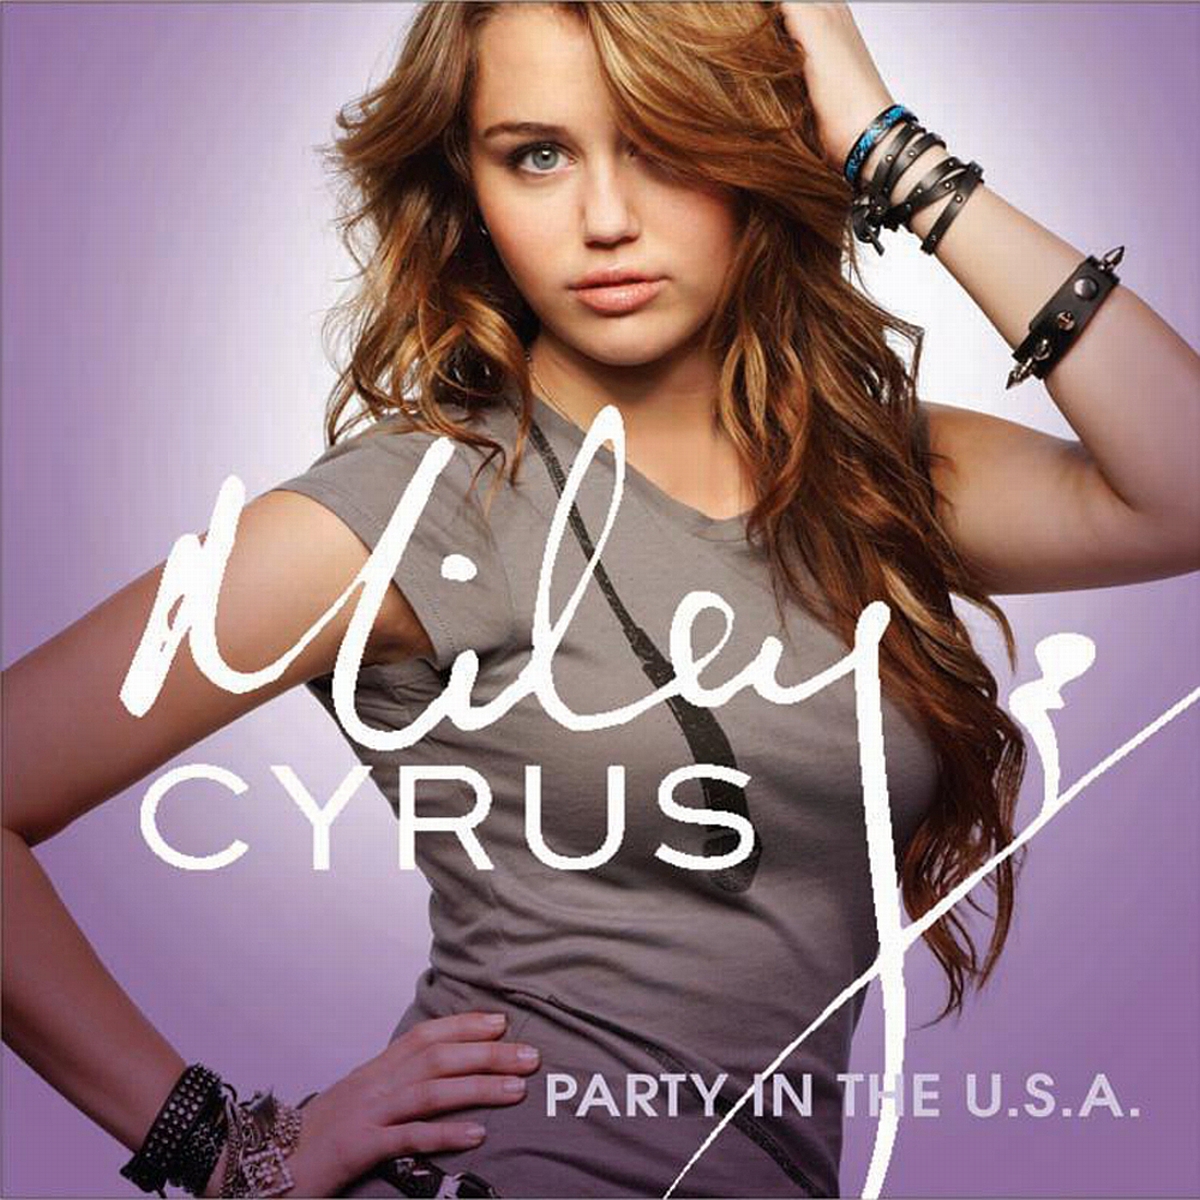 miley-cyrus-hot-Party-in-the-U.S.A.-youtube-music-video-hq-hd.jpg